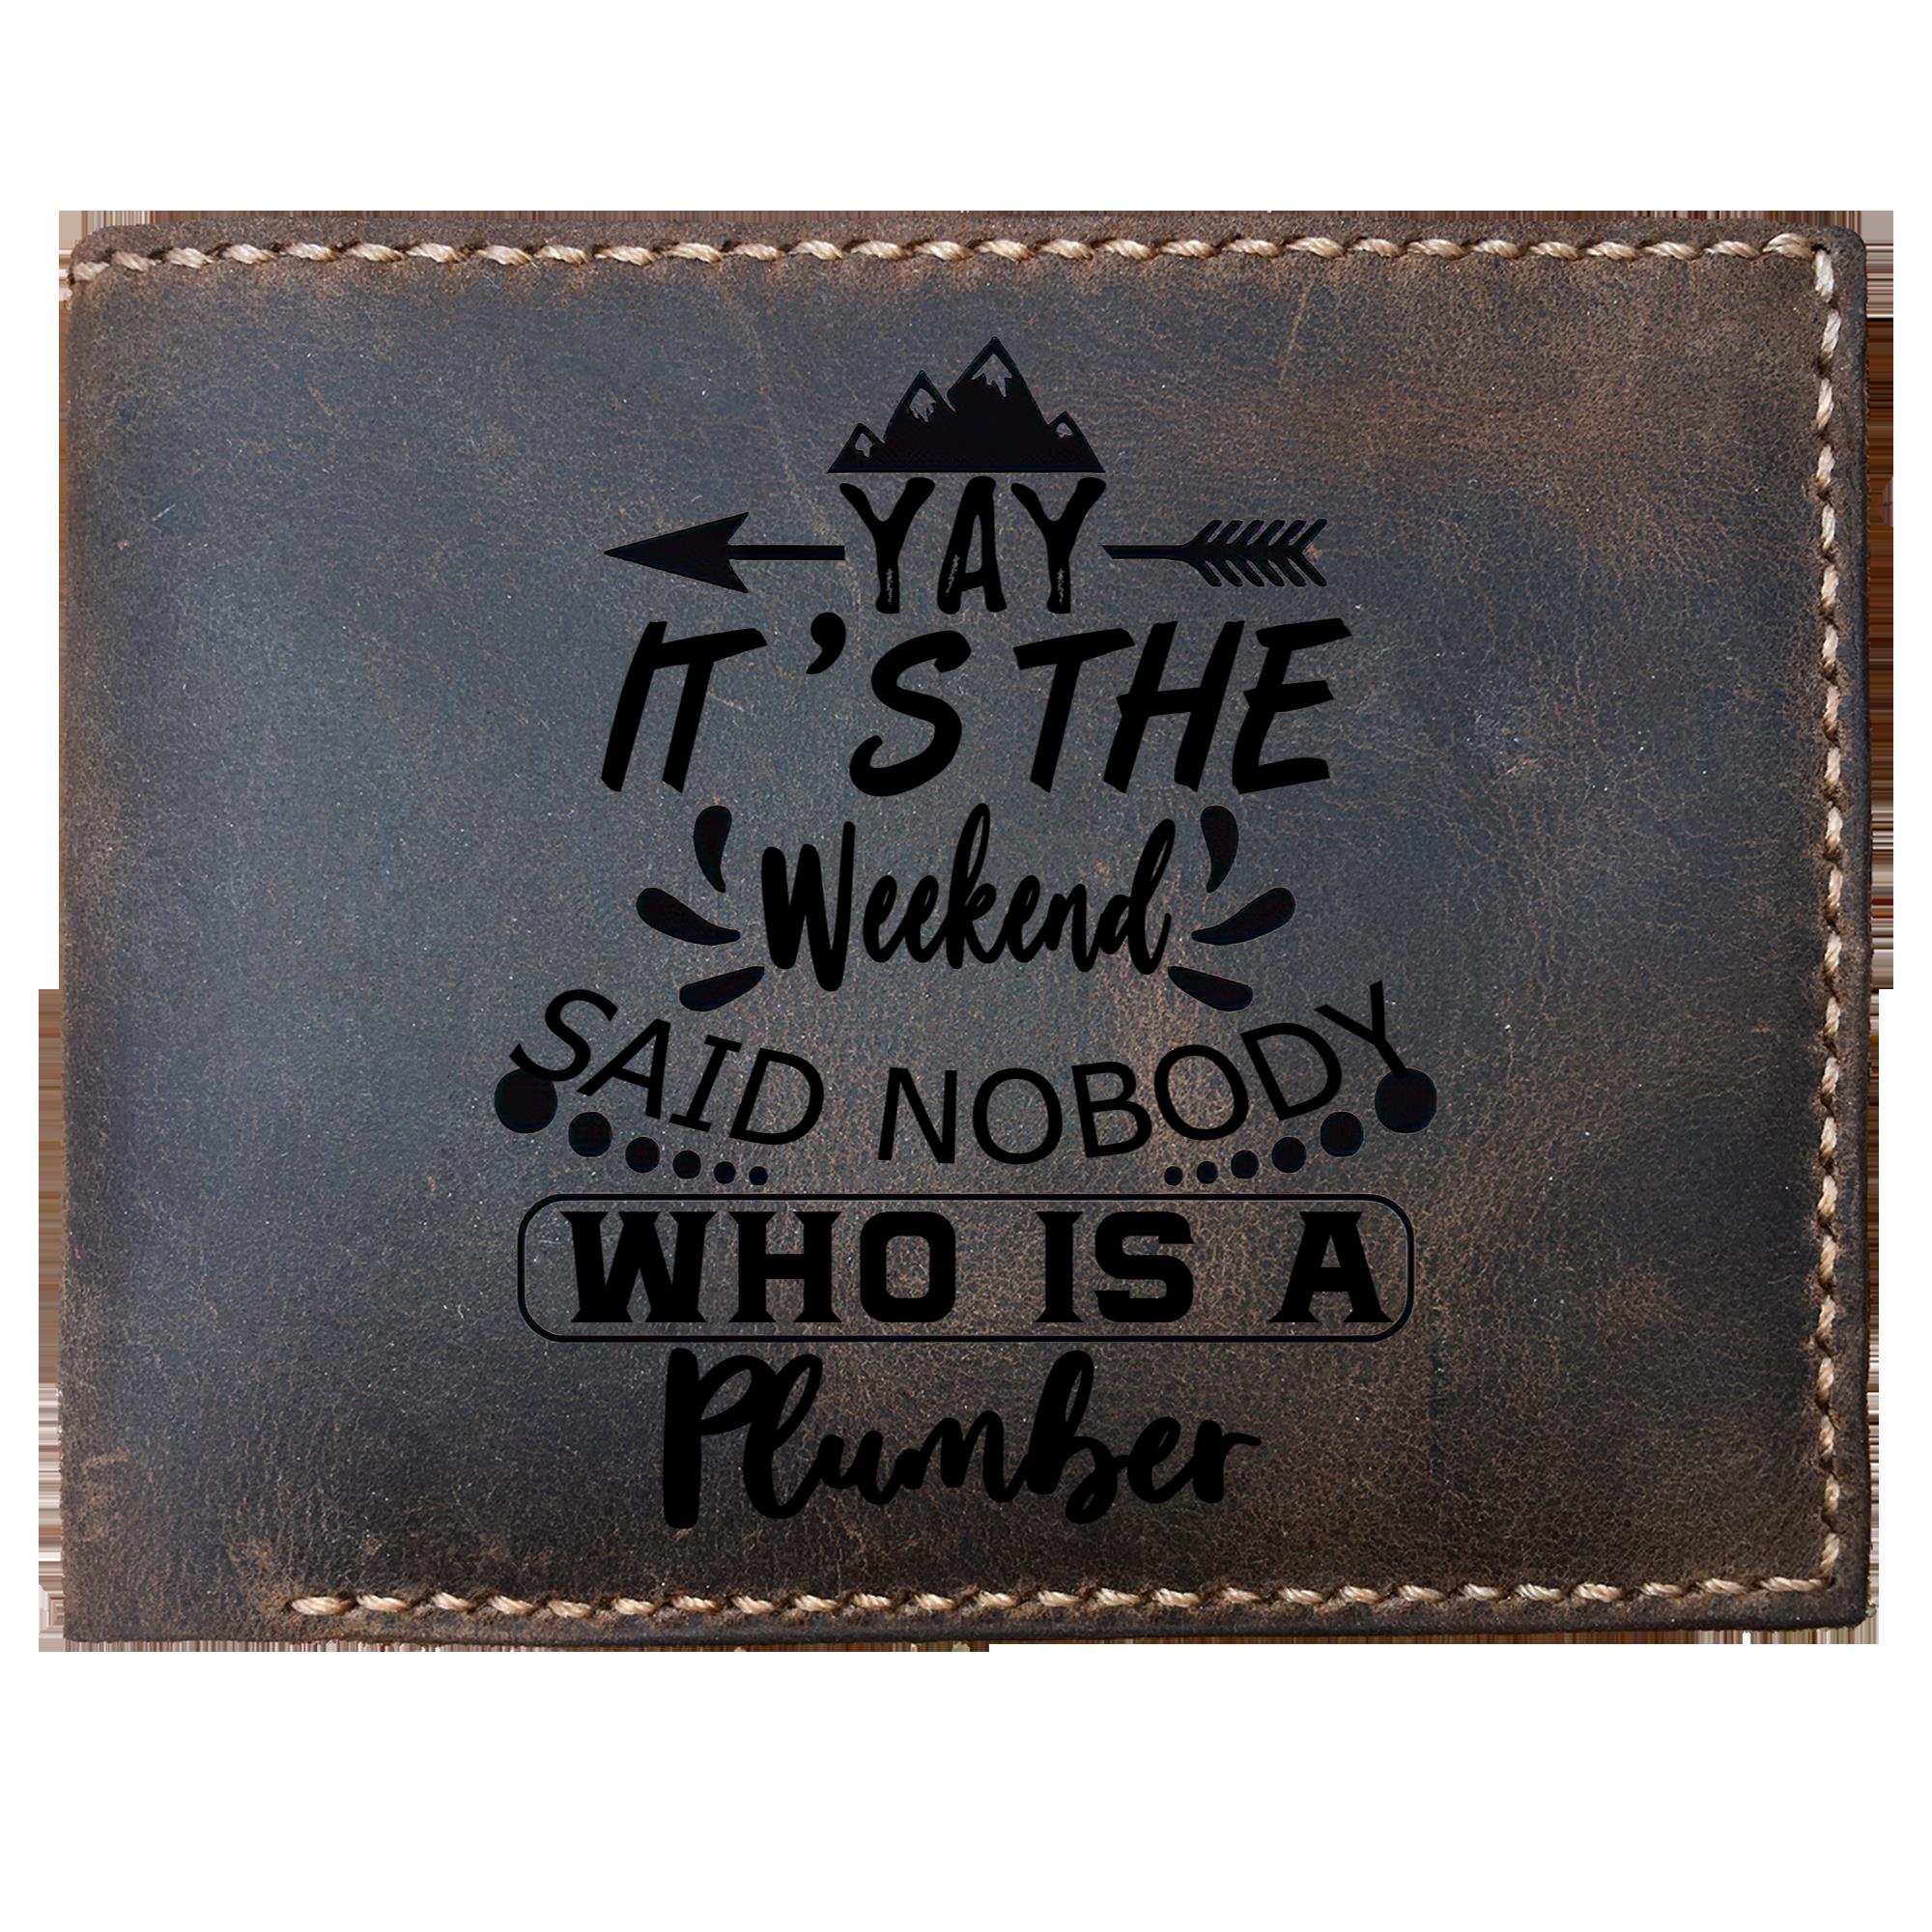 Skitongifts Funny Custom Laser Engraved Bifold Leather Wallet For Men, It's The Weekend Said Nobody Who Is A Plumber, Father's Day Gifts